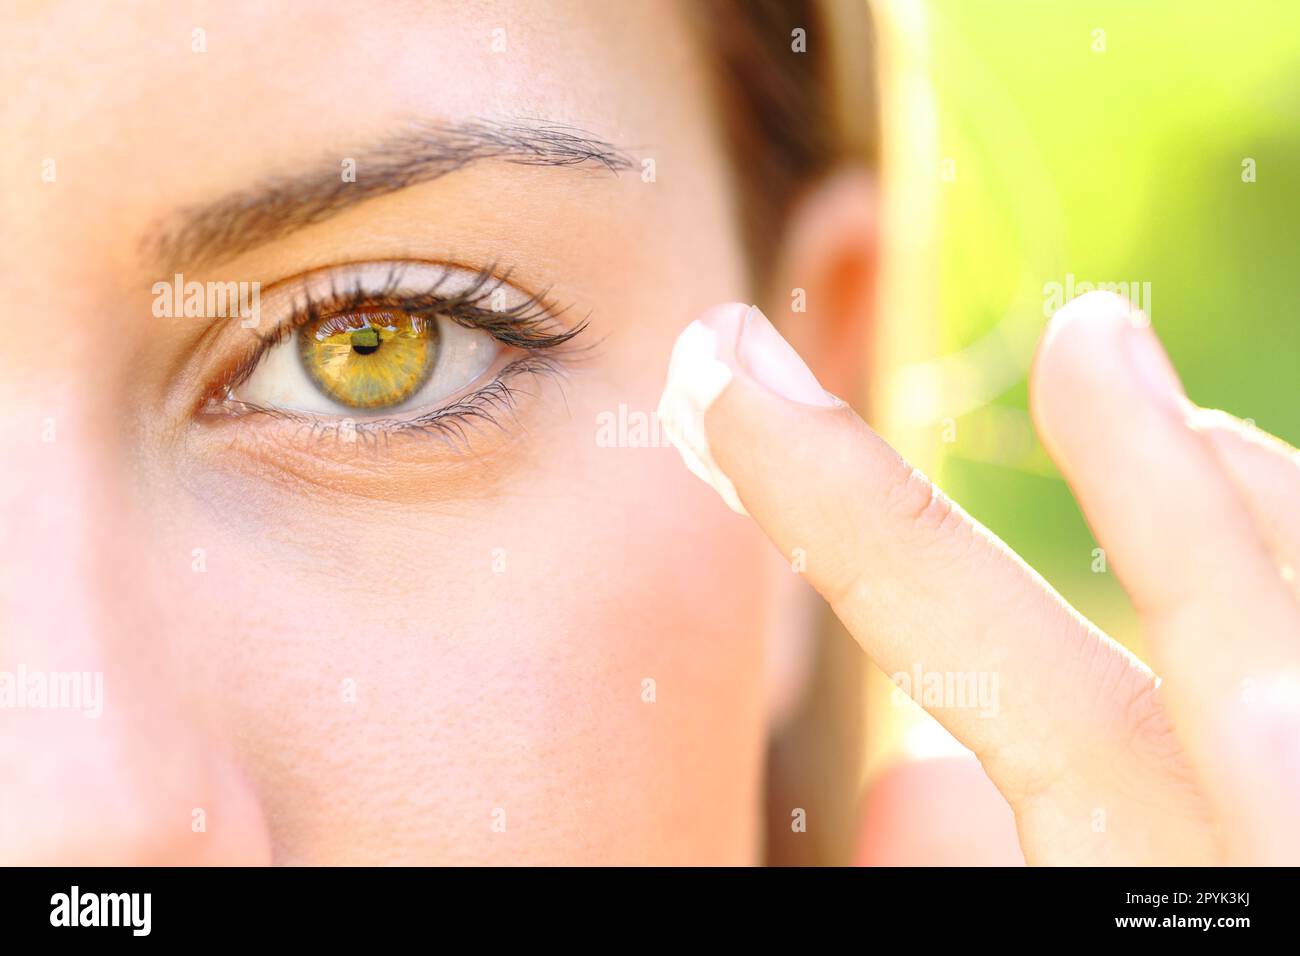 Woman hand hydrating face with moisturizer Stock Photo